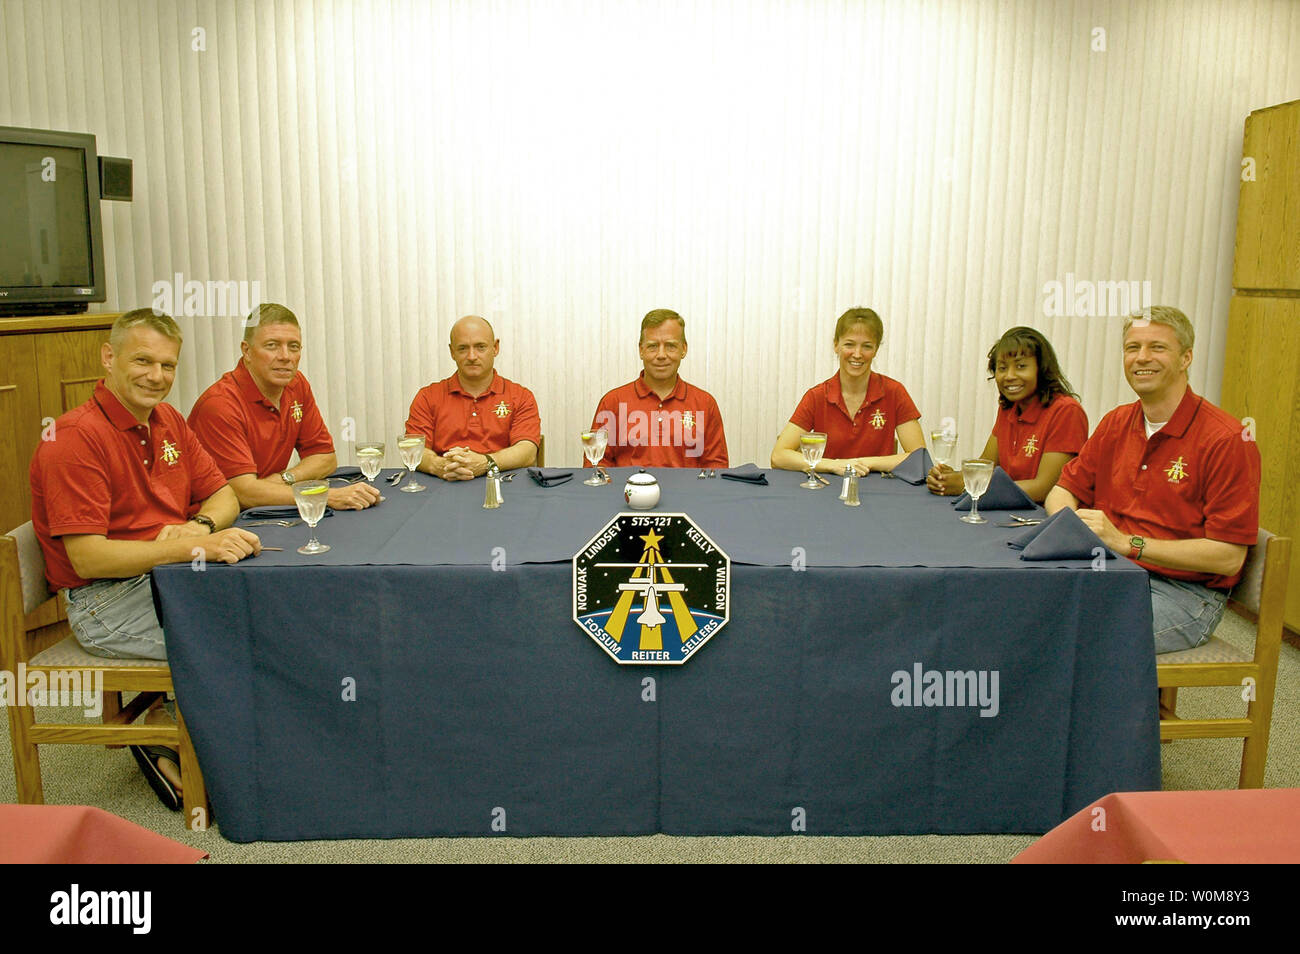 The mission STS-121 crew gathers for the traditional breakfast before they suit up for launch July 1, 2006. Seated left to right are Mission Specialists Piers Sellers and Michael Fossum, Pilot Mark Kelly, Commander Steven Lindsey, and Mission Specialists Lisa Nowak, Stephanie Wilson and Thomas Reiter, who represents the European Space Agency. The launch of Space Shuttle Discovery on mission STS-121 is the 115th shuttle flight and the 18th U.S. flight to the International Space Station. During the 12-day mission, the STS-121 crew will test new equipment and procedures to improve shuttle safety, Stock Photo